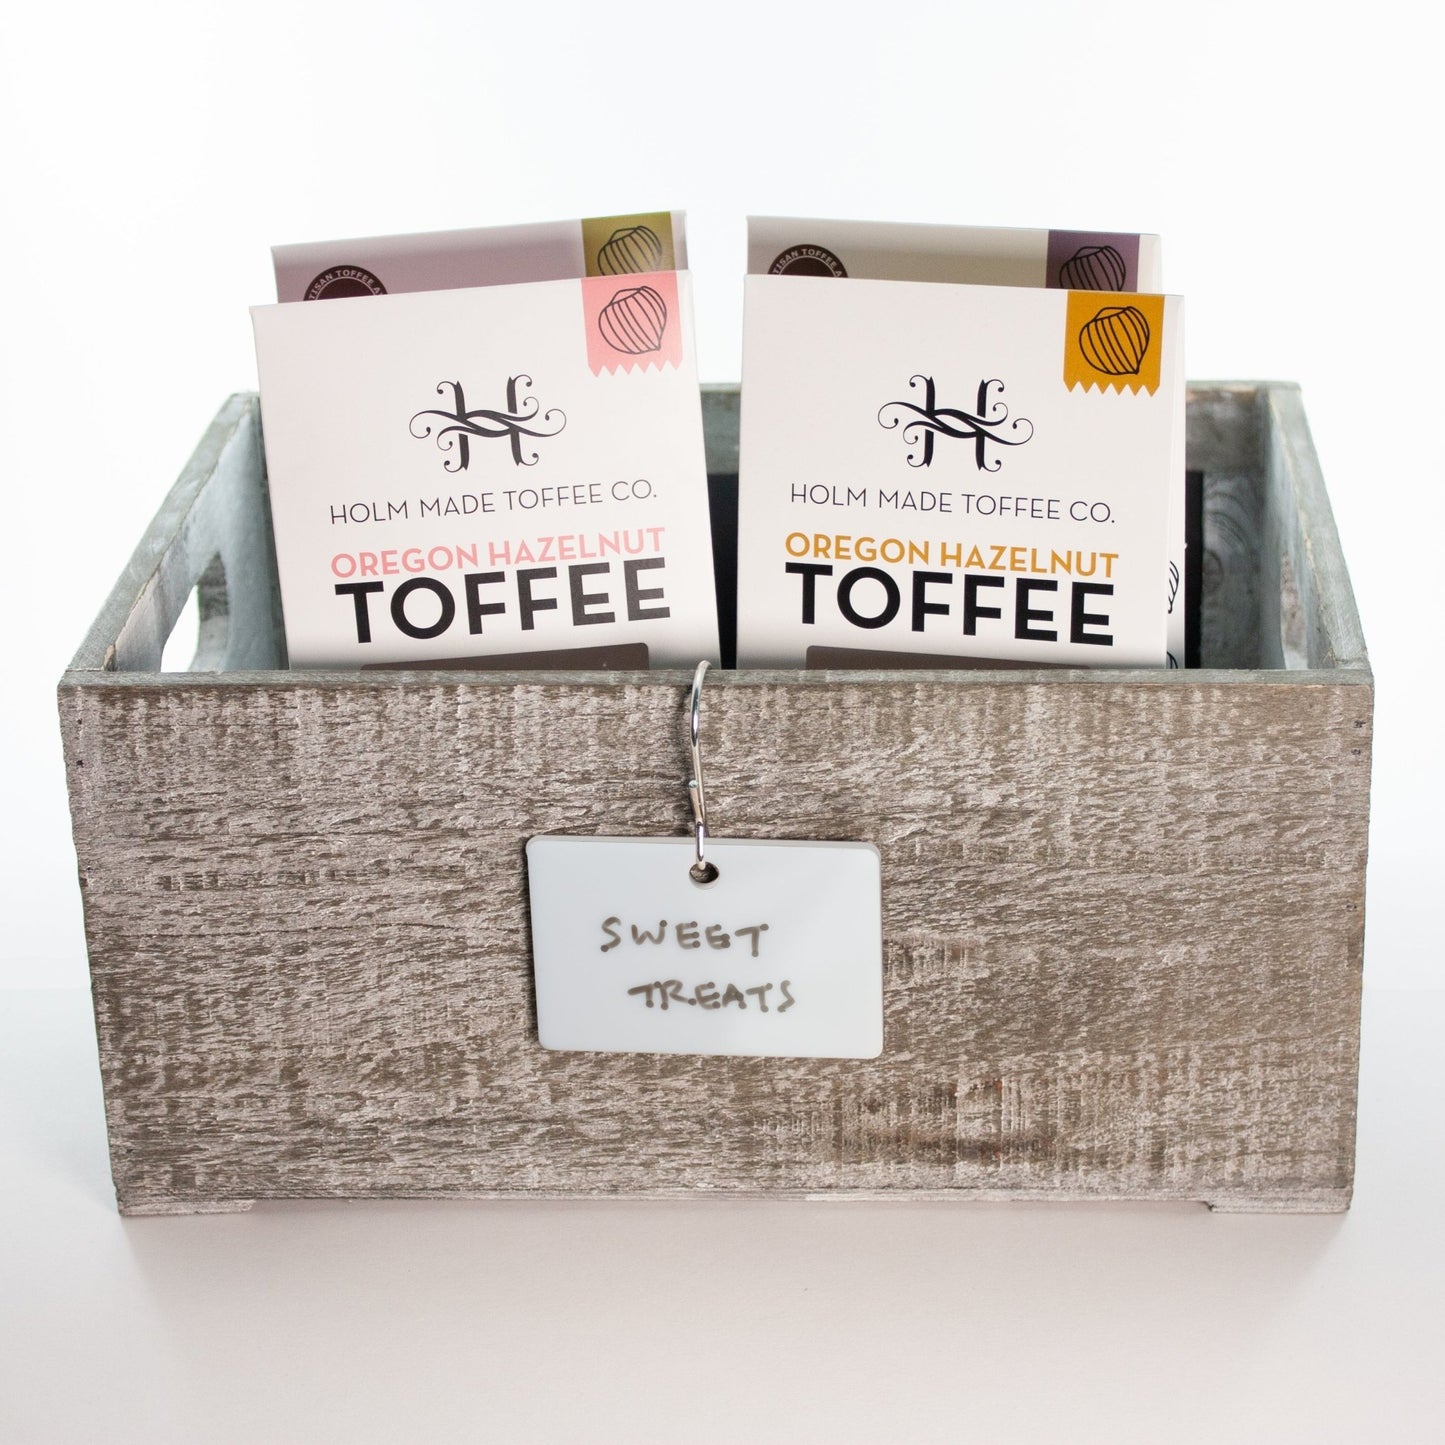 Dry-Erase Hooked Labels for Storage Bin Organization hanging from gray wood box with Holm Made Toffee- by LeeMo Designs in Bend, Oregon